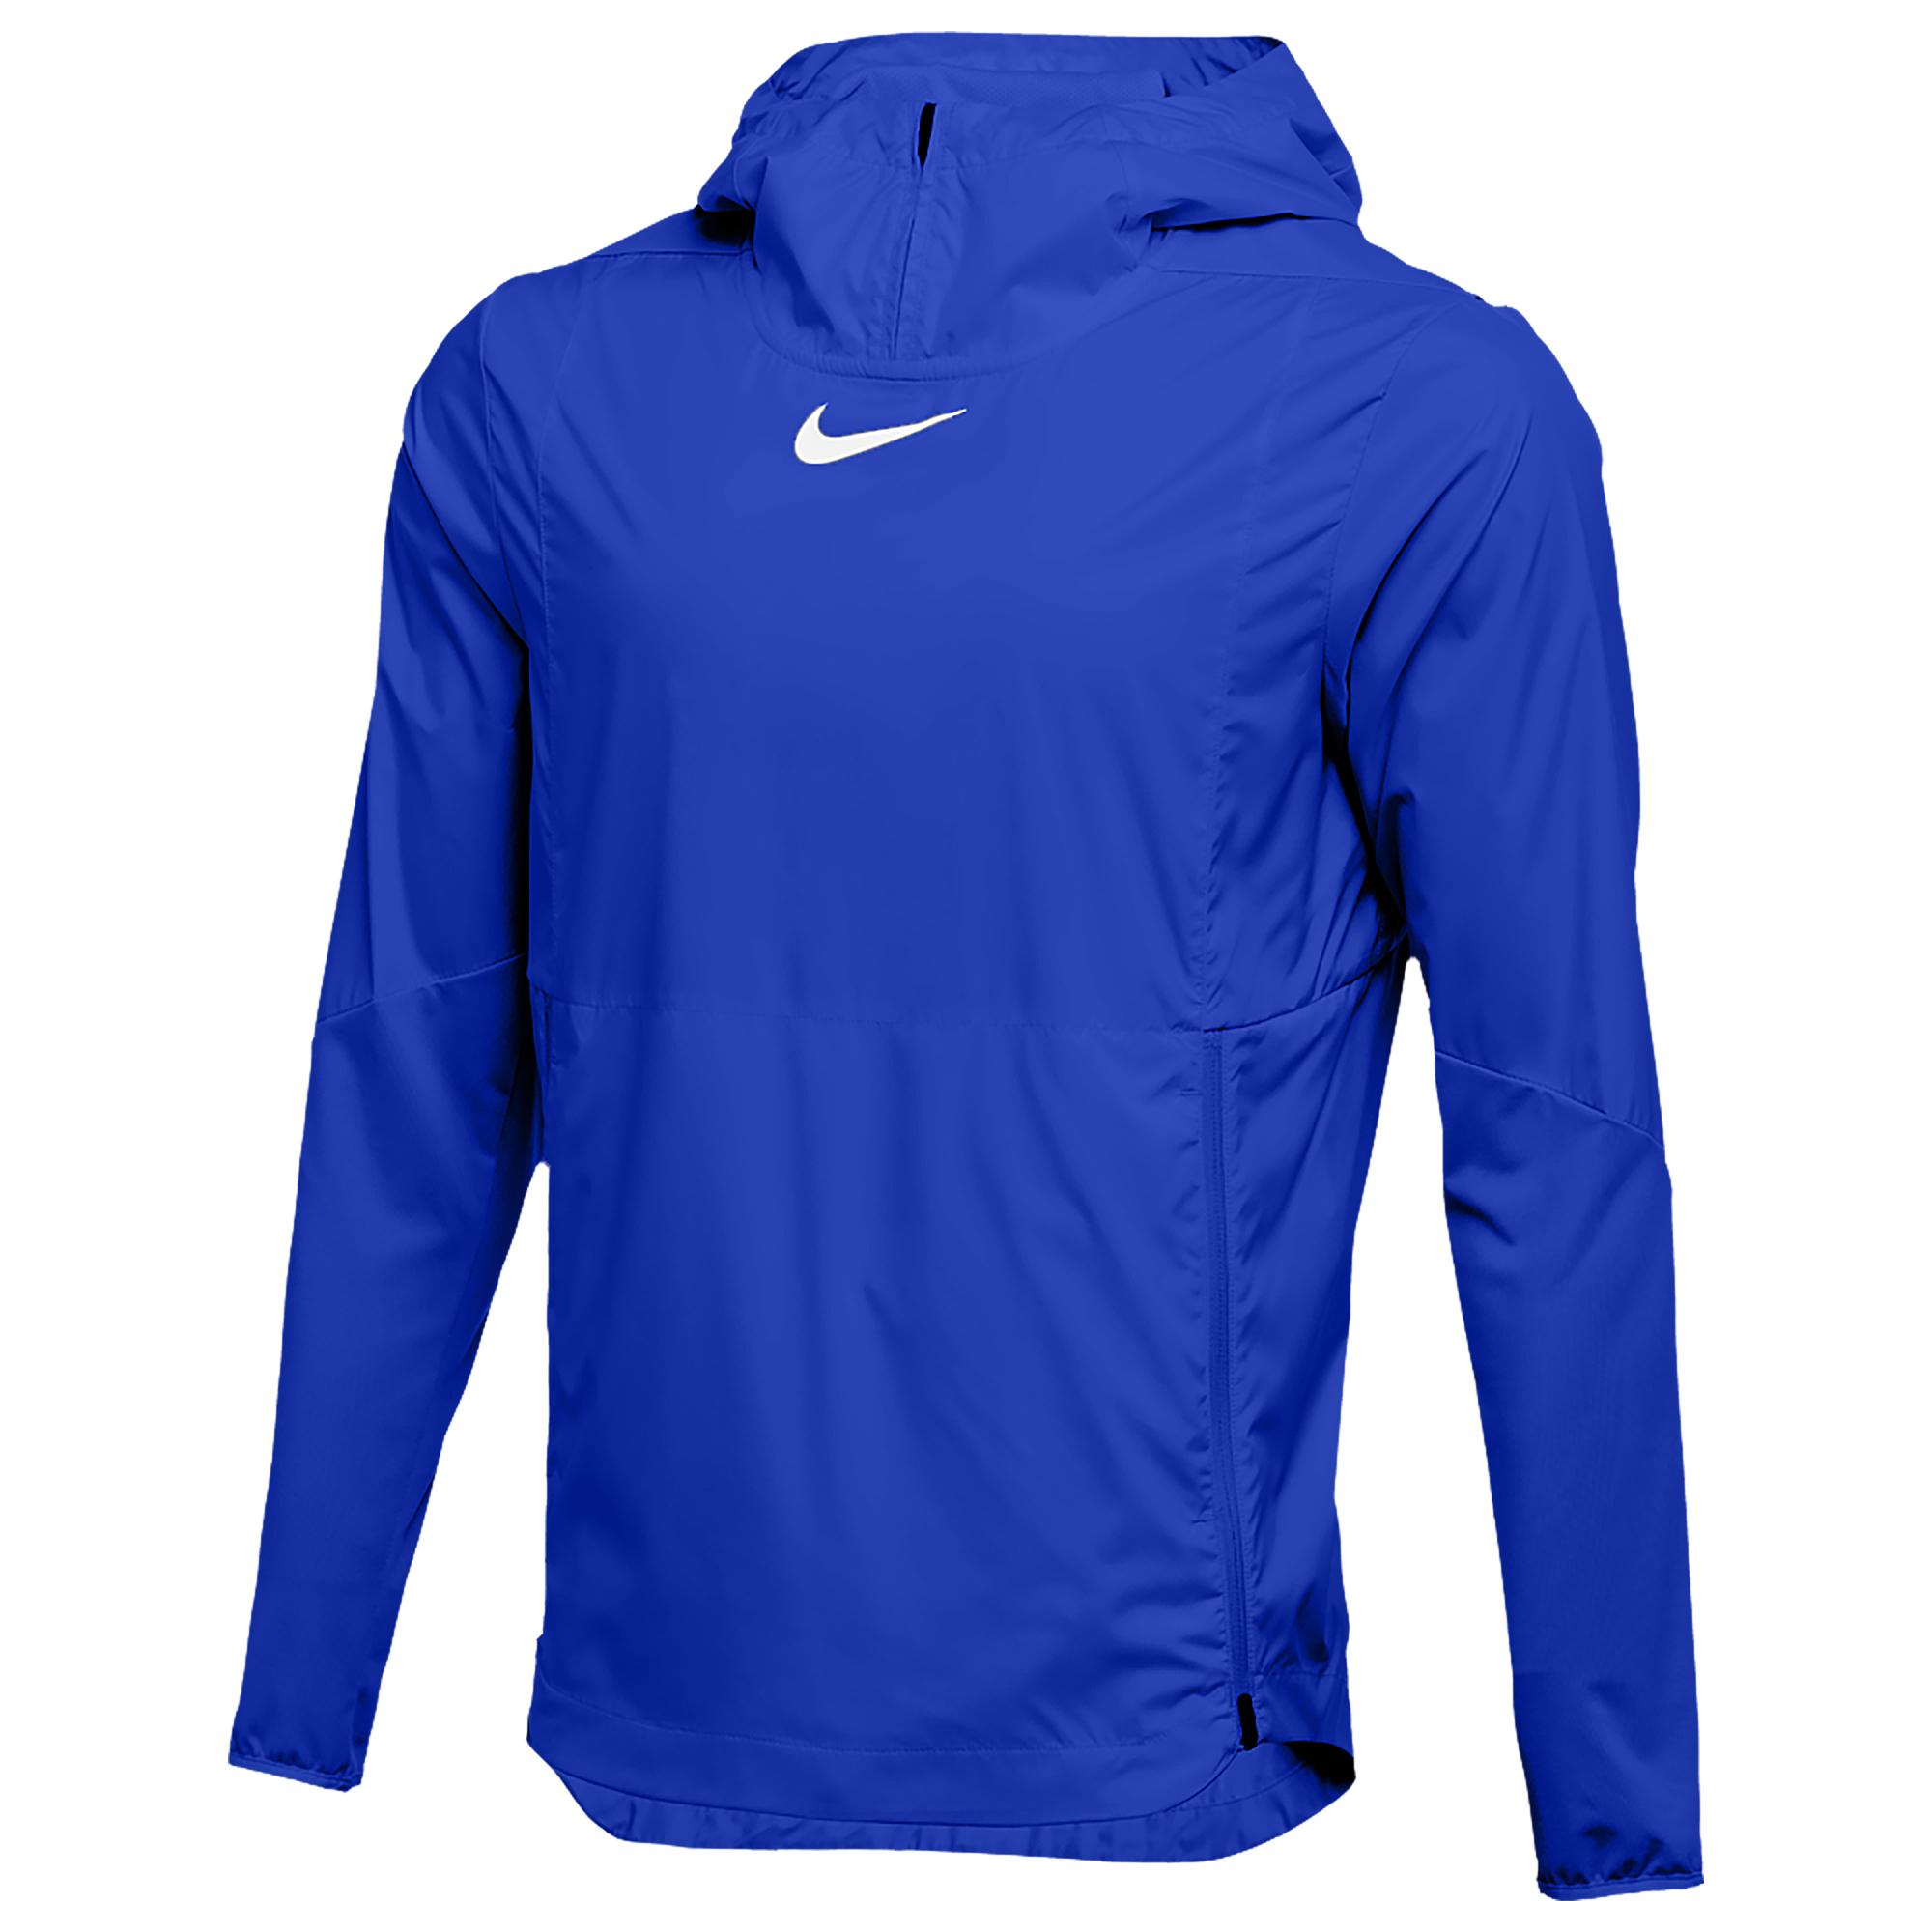 Nike Cotton Team Authentic Lightweight Player Jacket in Blue for Men - Lyst